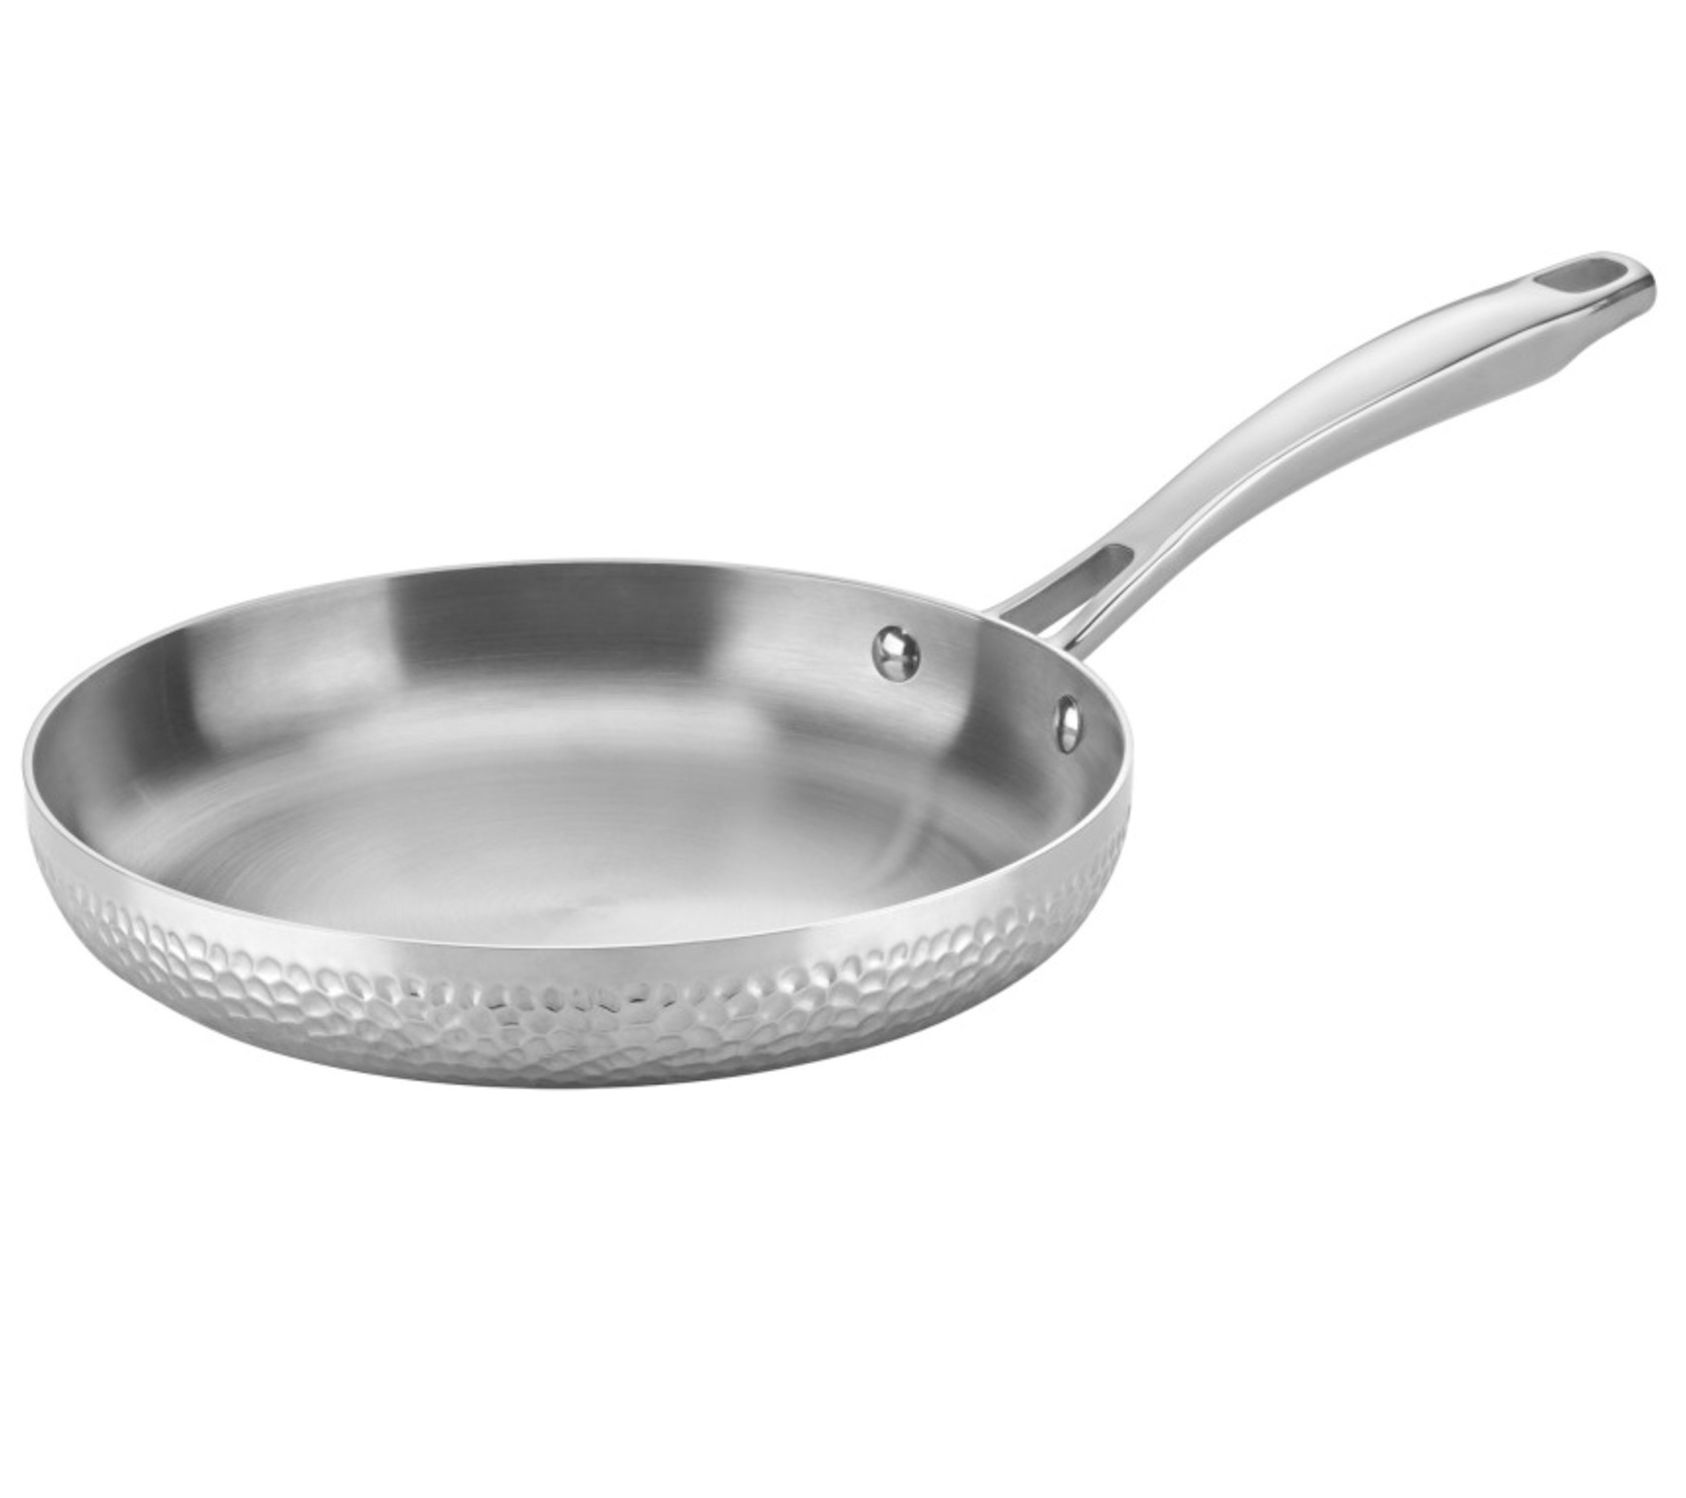 Cuisinart MultiClad Pro Stainless 10-Inch Open Skillet,Stainless